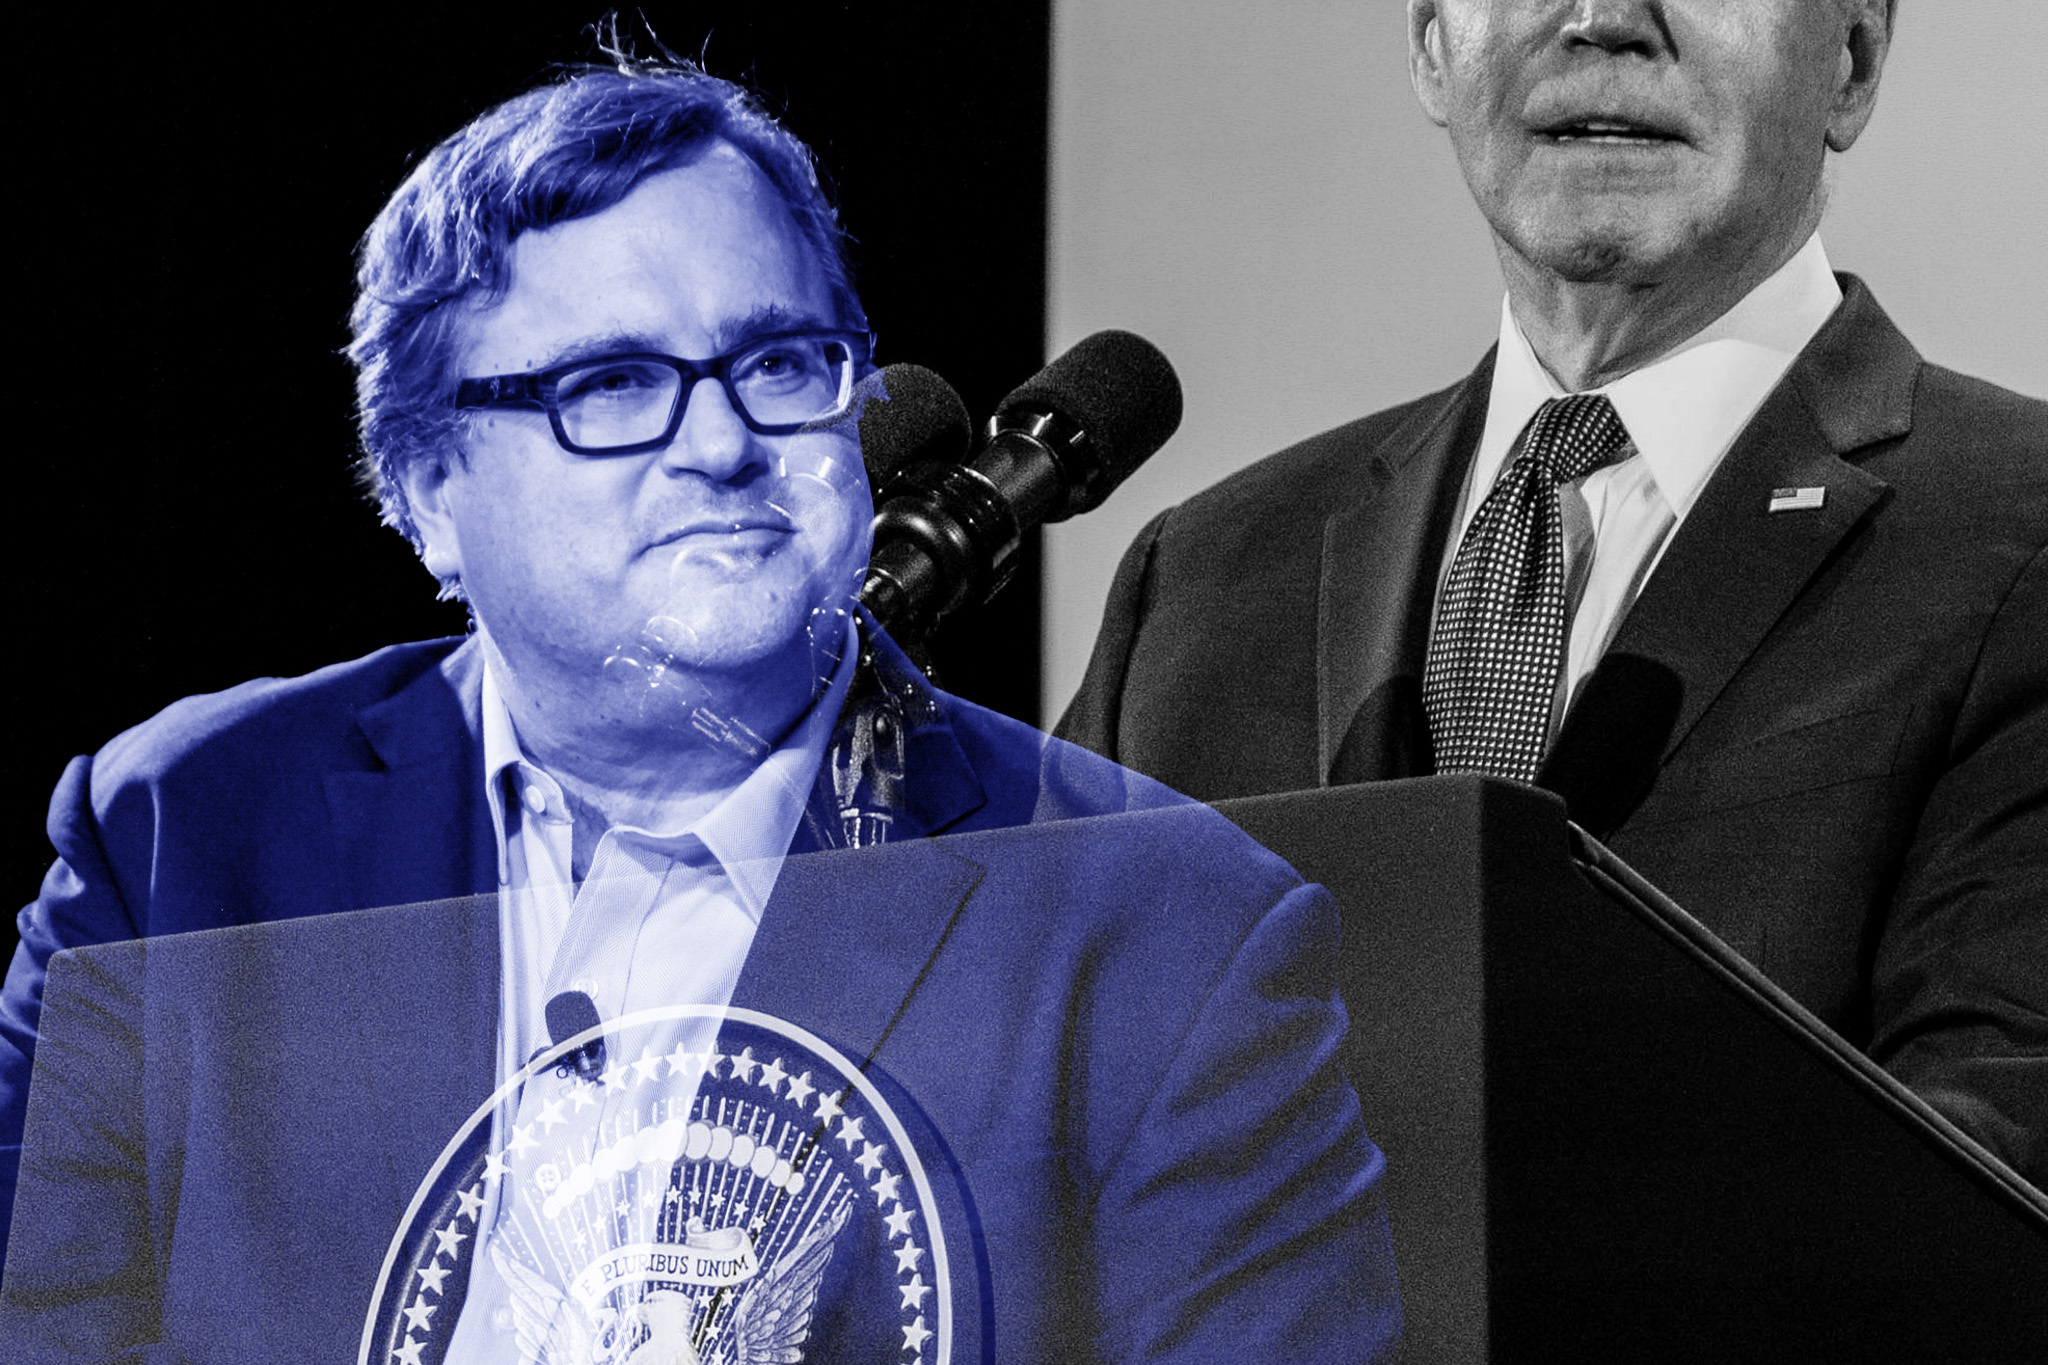 The image shows a double exposure of two men at a podium, one overlaid in blue with glasses and the other in a suit and tie with the U.S. presidential seal visible.